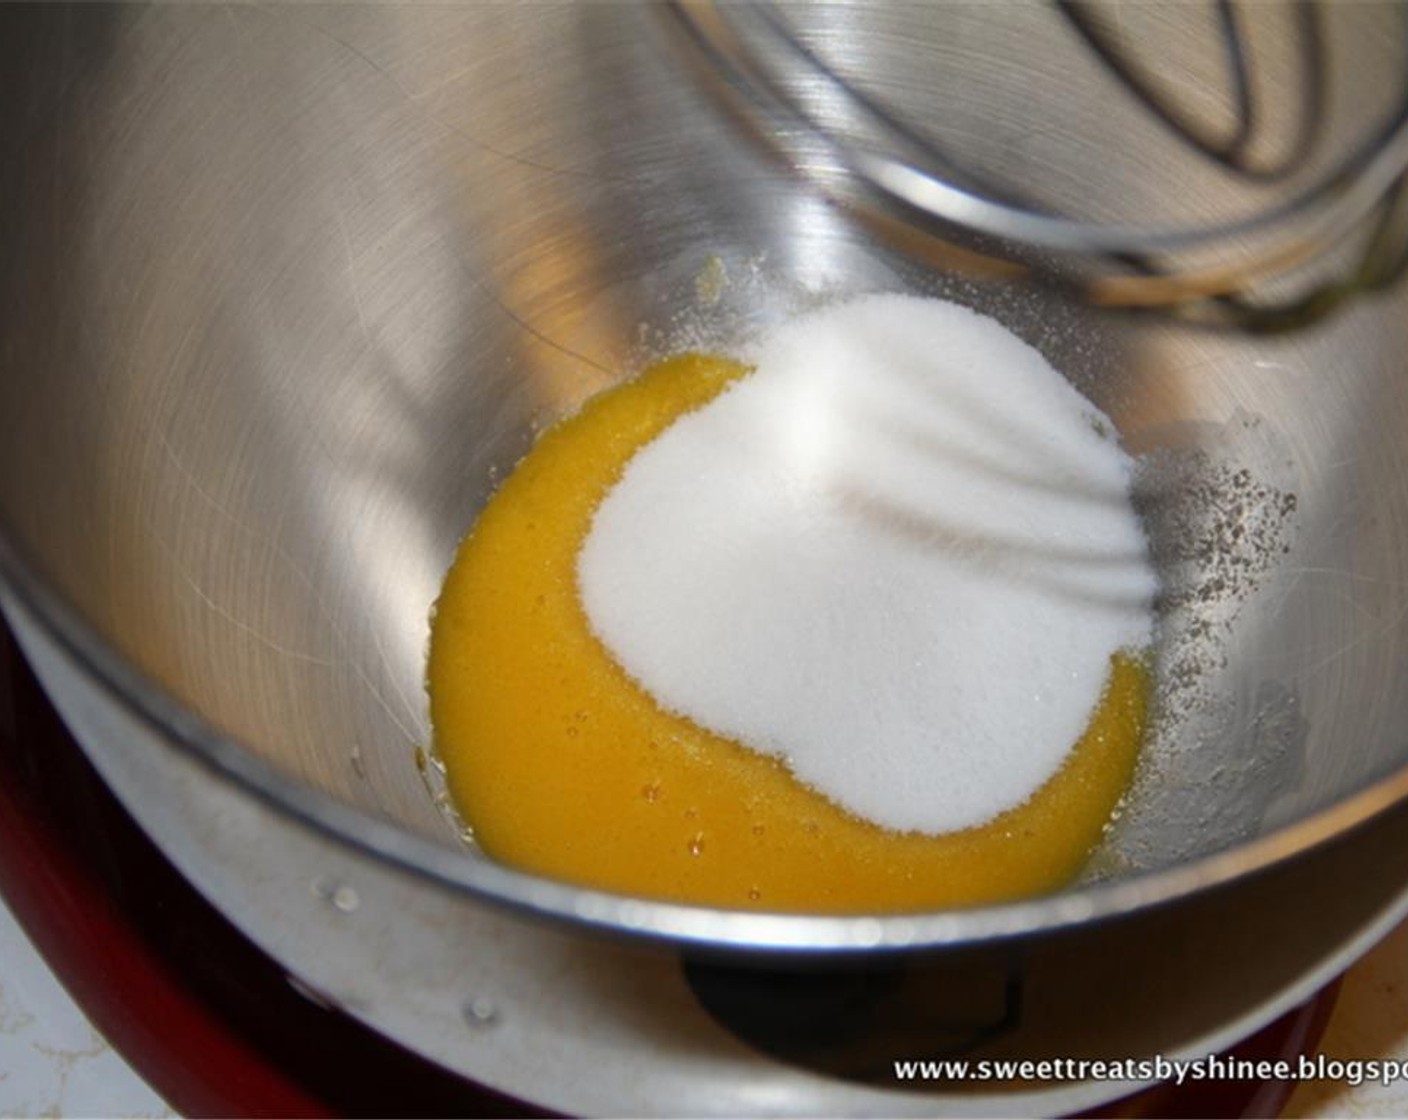 step 2 In a separate bowl, slightly beat yolks of the Eggs (2) and add Granulated Sugar (1/4 cup). Continue to whisk until the mixture is pale white and sugar is mostly dissolved.